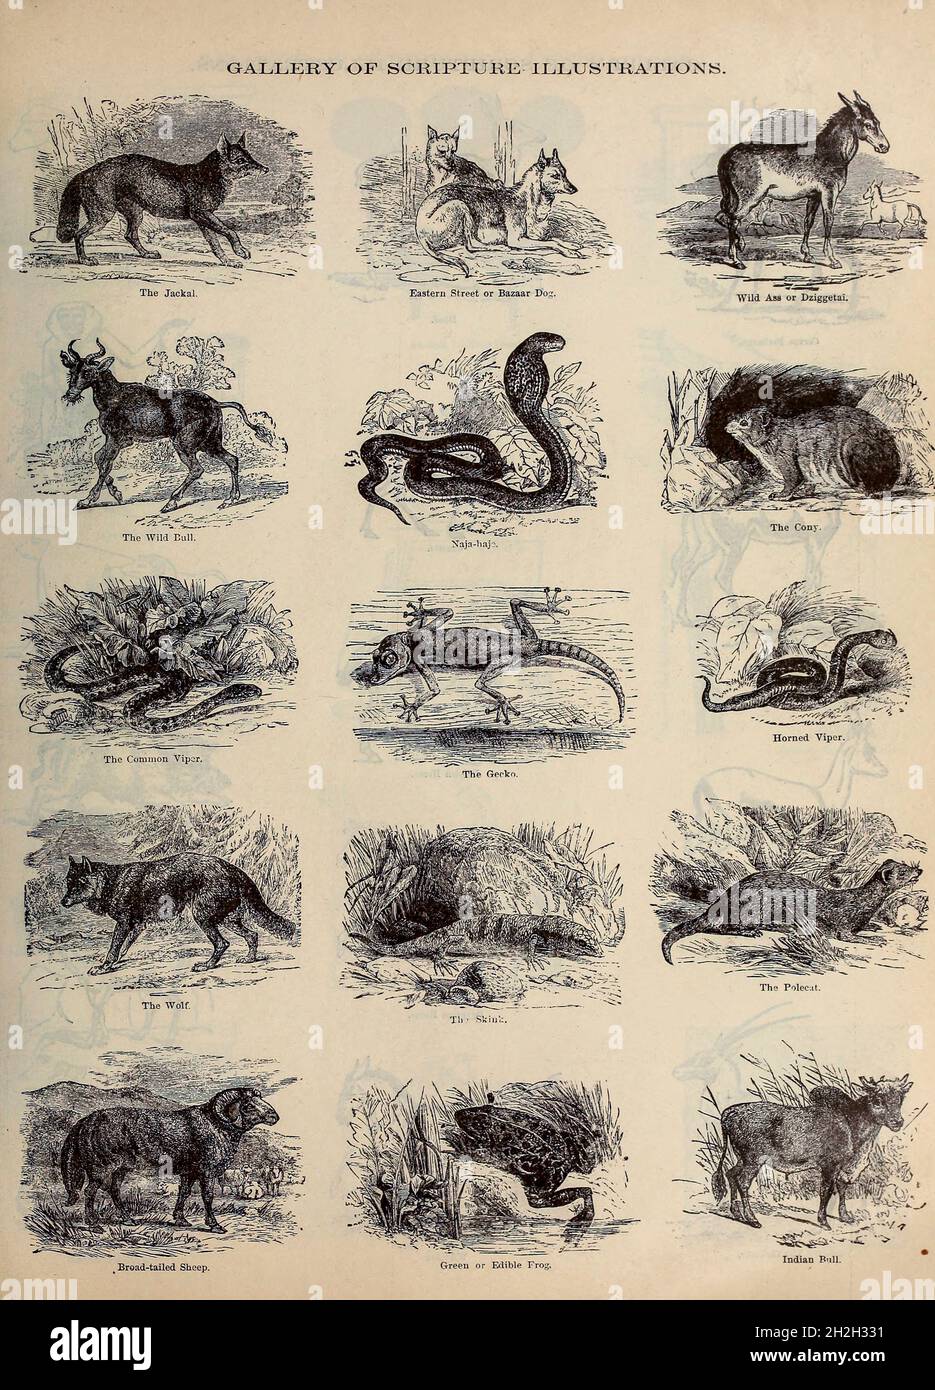 Gallery of Scripture Illustrations of Animals of the Bible from ' The Doré family Bible ' containing the Old and New Testaments, The Apocrypha Embellished with Fine Full-Page Engravings, Illustrations and the Dore Bible Gallery. Published in Philadelphia by William T. Amies in 1883 Stock Photo